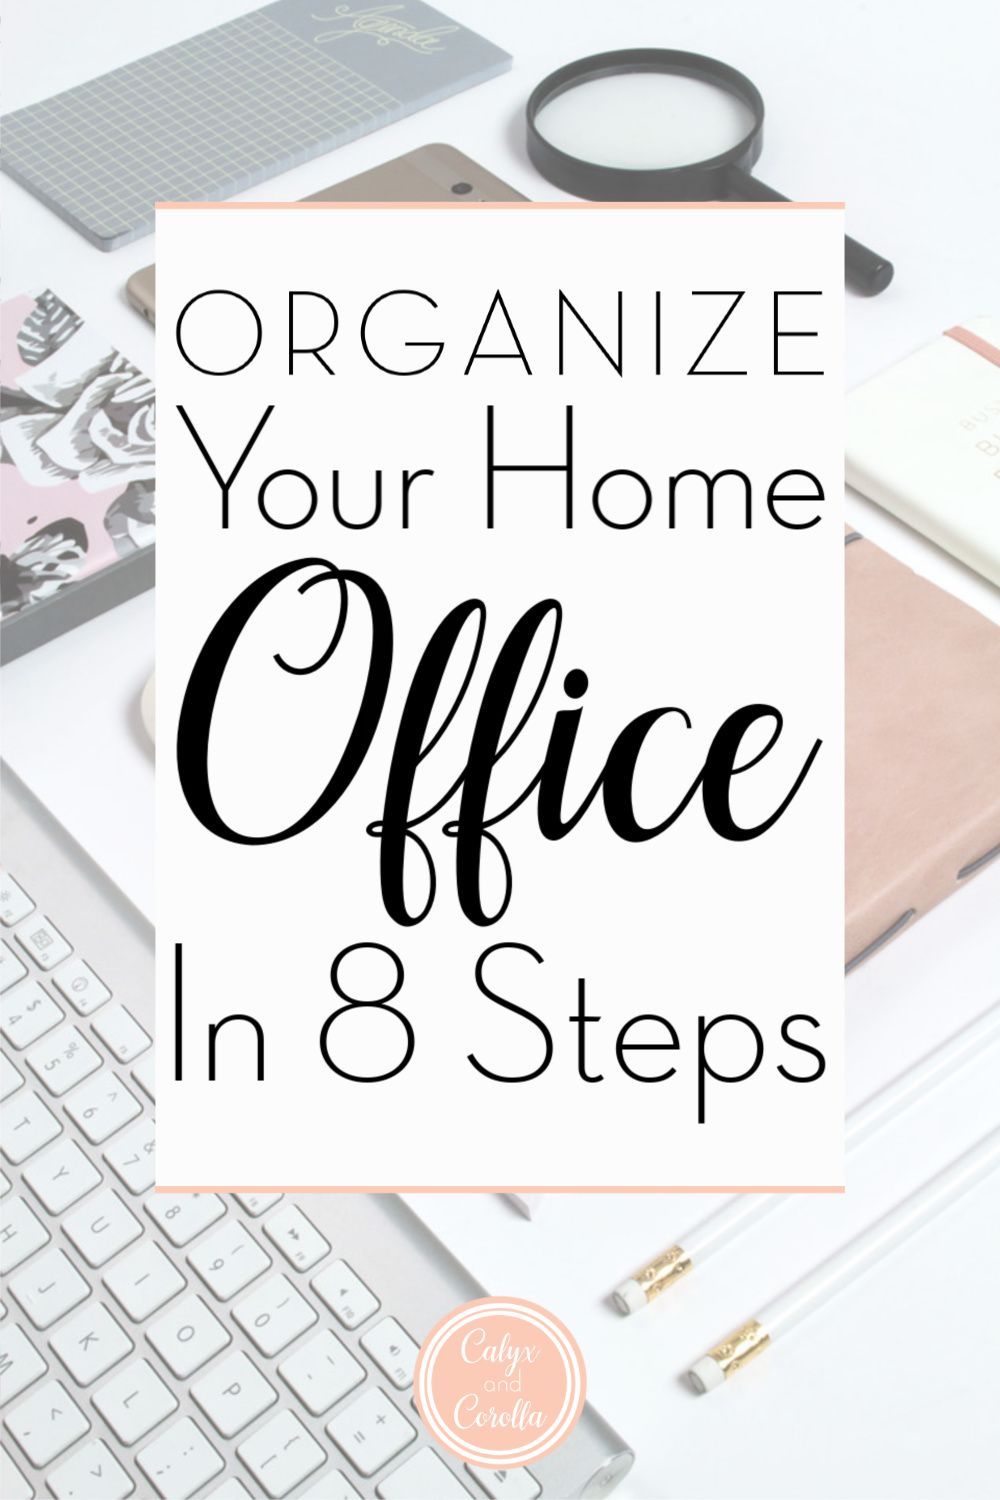 Organize Your Home Office in 8 Steps! - Organize Your Home Office in 8 Steps! -   18 diy Organization workspaces ideas